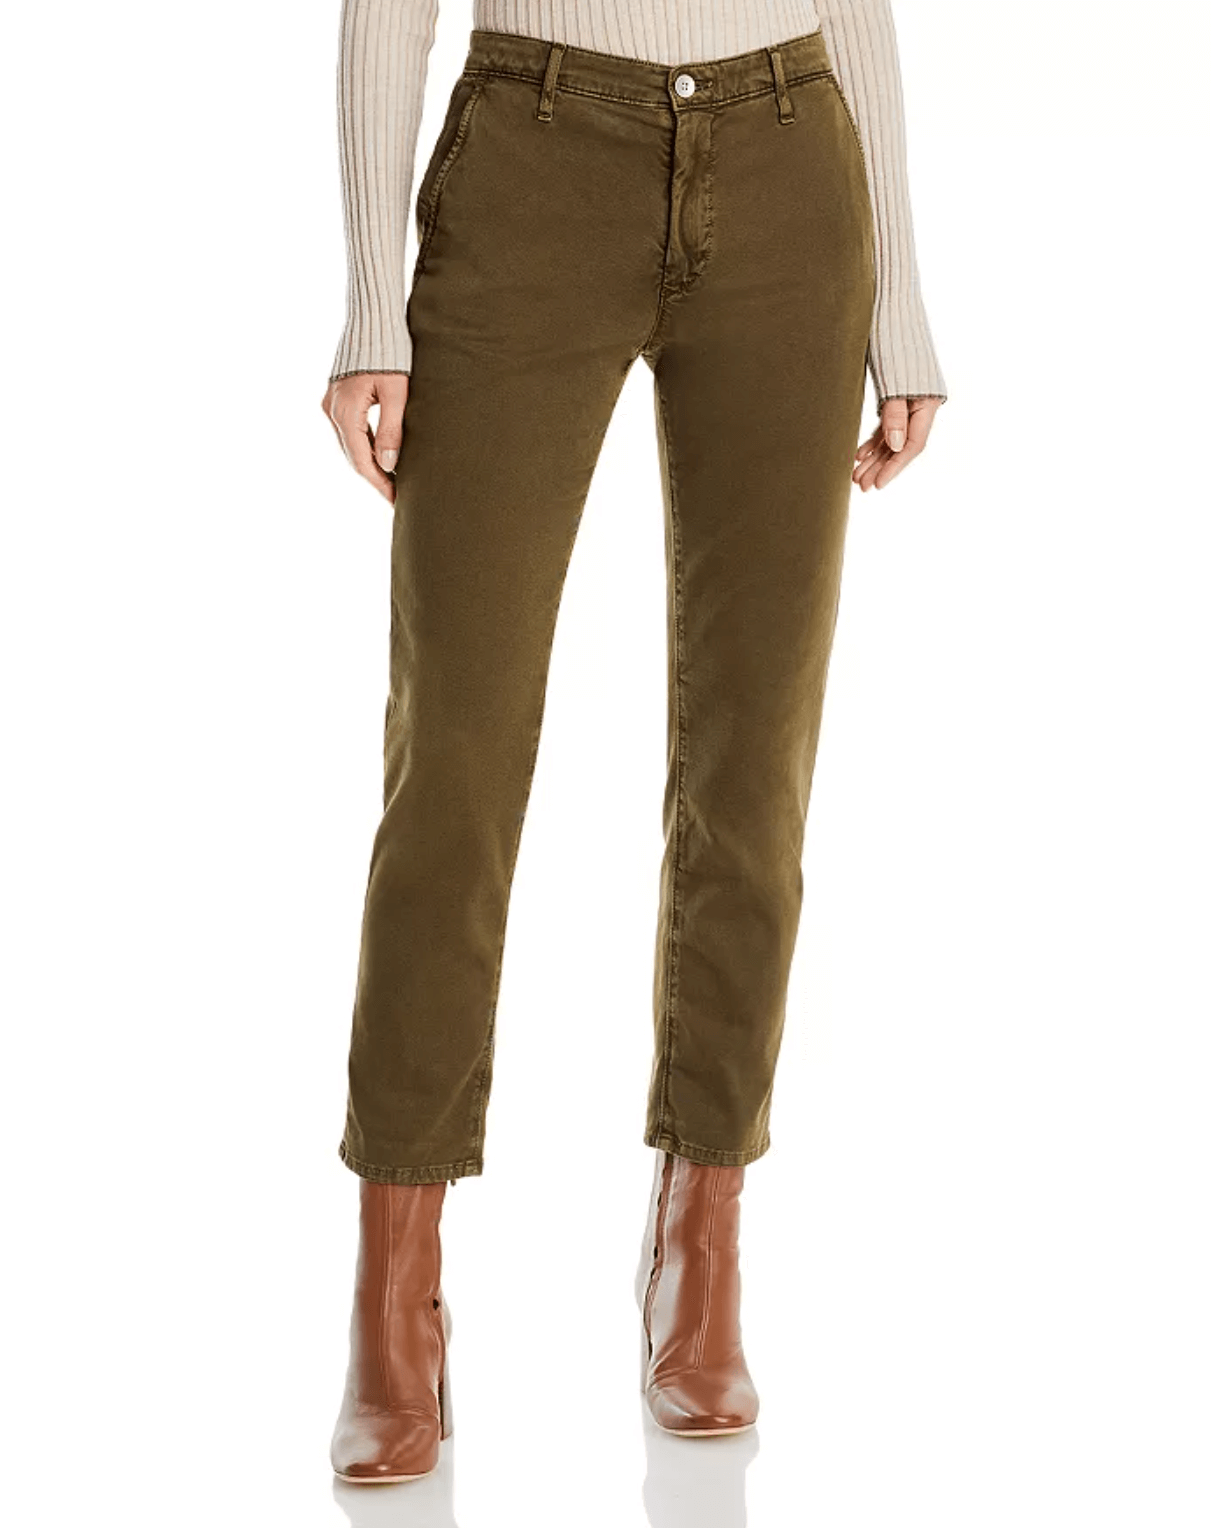 AG jeans caden tailored trouser in shady moss, front view